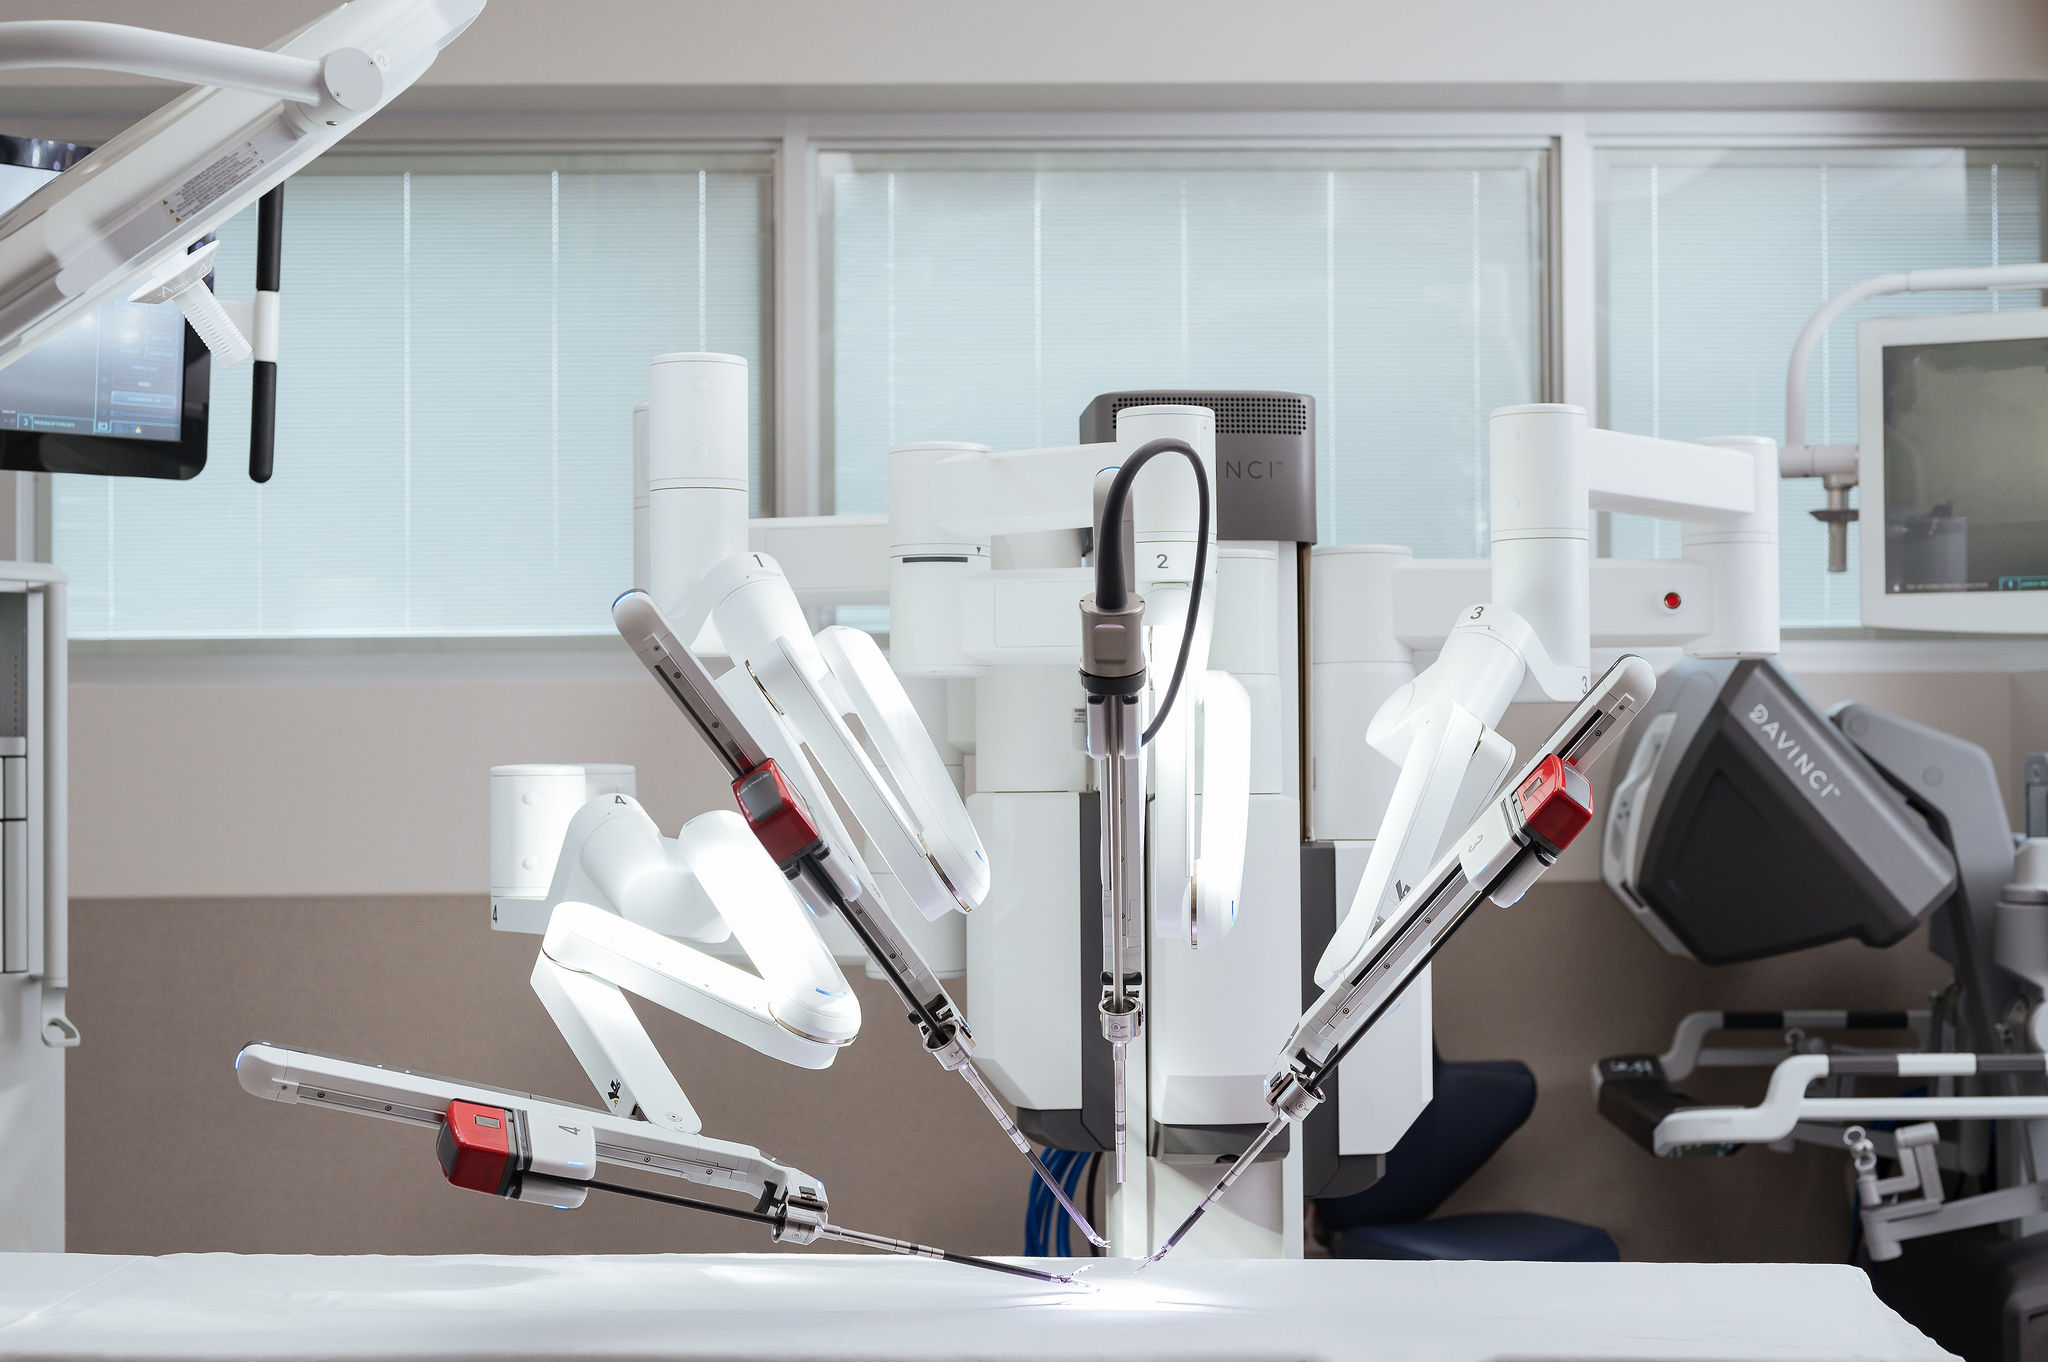 The DAVINCI surgical robot. This surgical robot has four arms equipped with laparoscopic surgical arms that surgeons use to perform minimally invasive surgeries on patients at the TN Surgery Center.